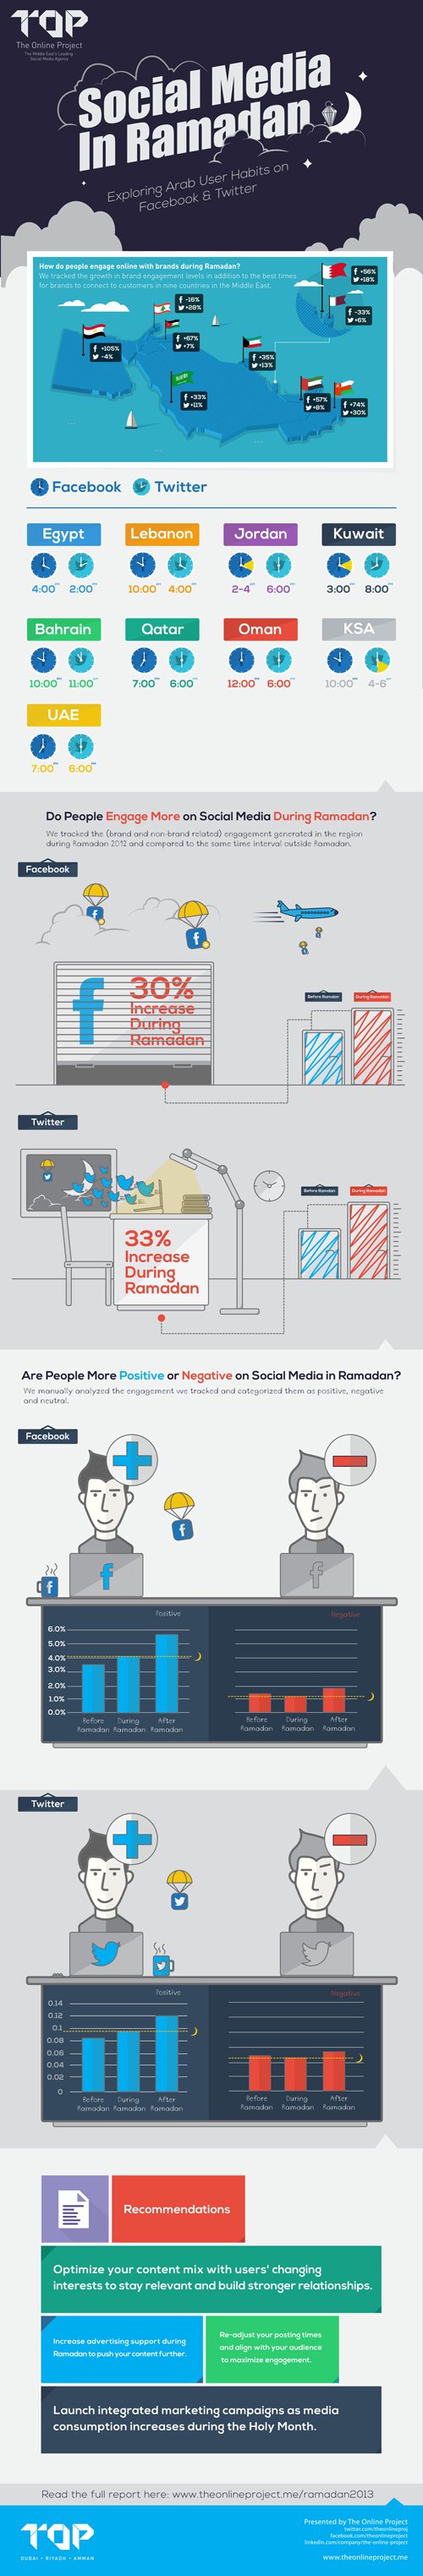 How MENA uses Facebook and Twitter during Ramadan [Infographic]